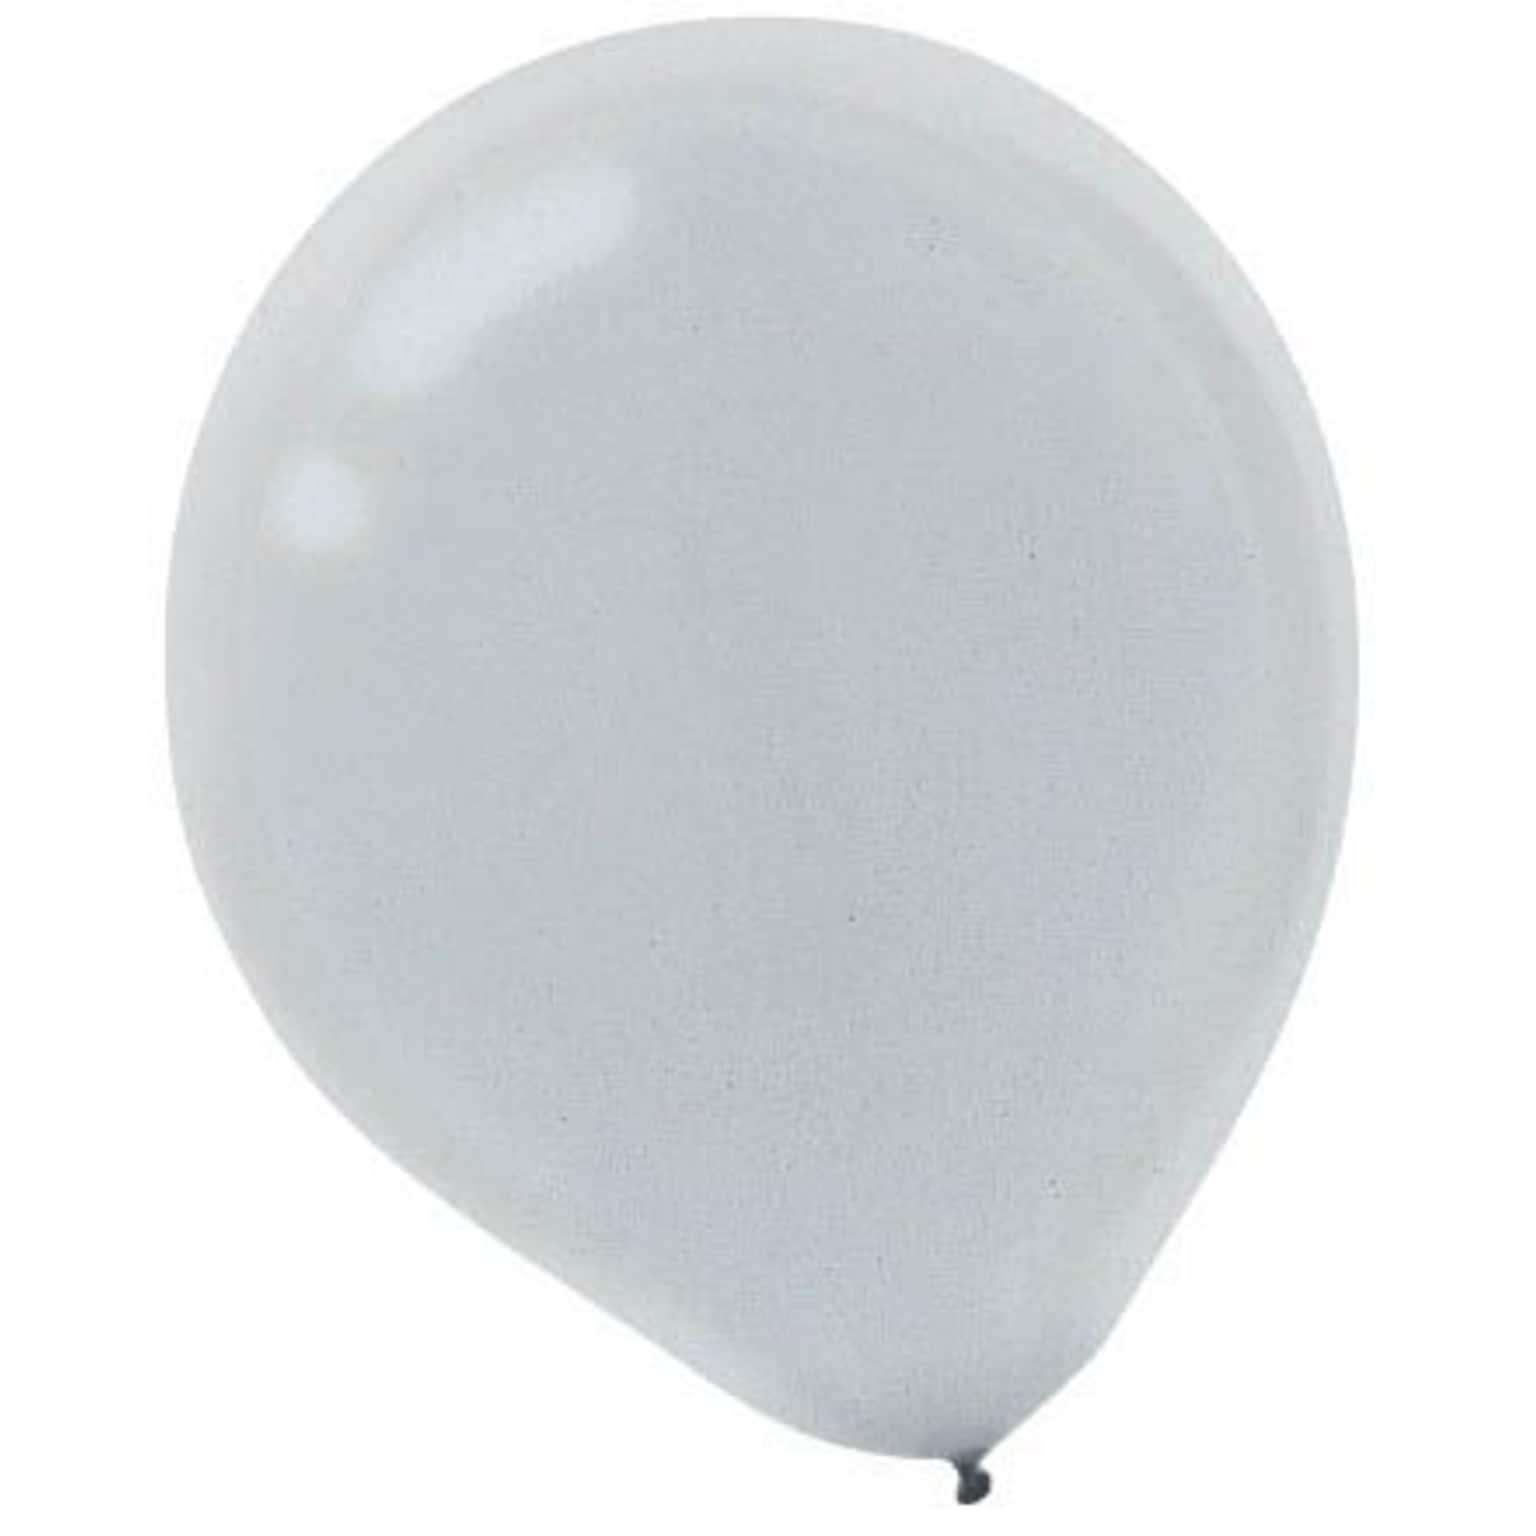 Amscan Pearlized Latex Balloons Packaged, 12, 3/Pack, Silver, 72 Per Pack (113251.18)